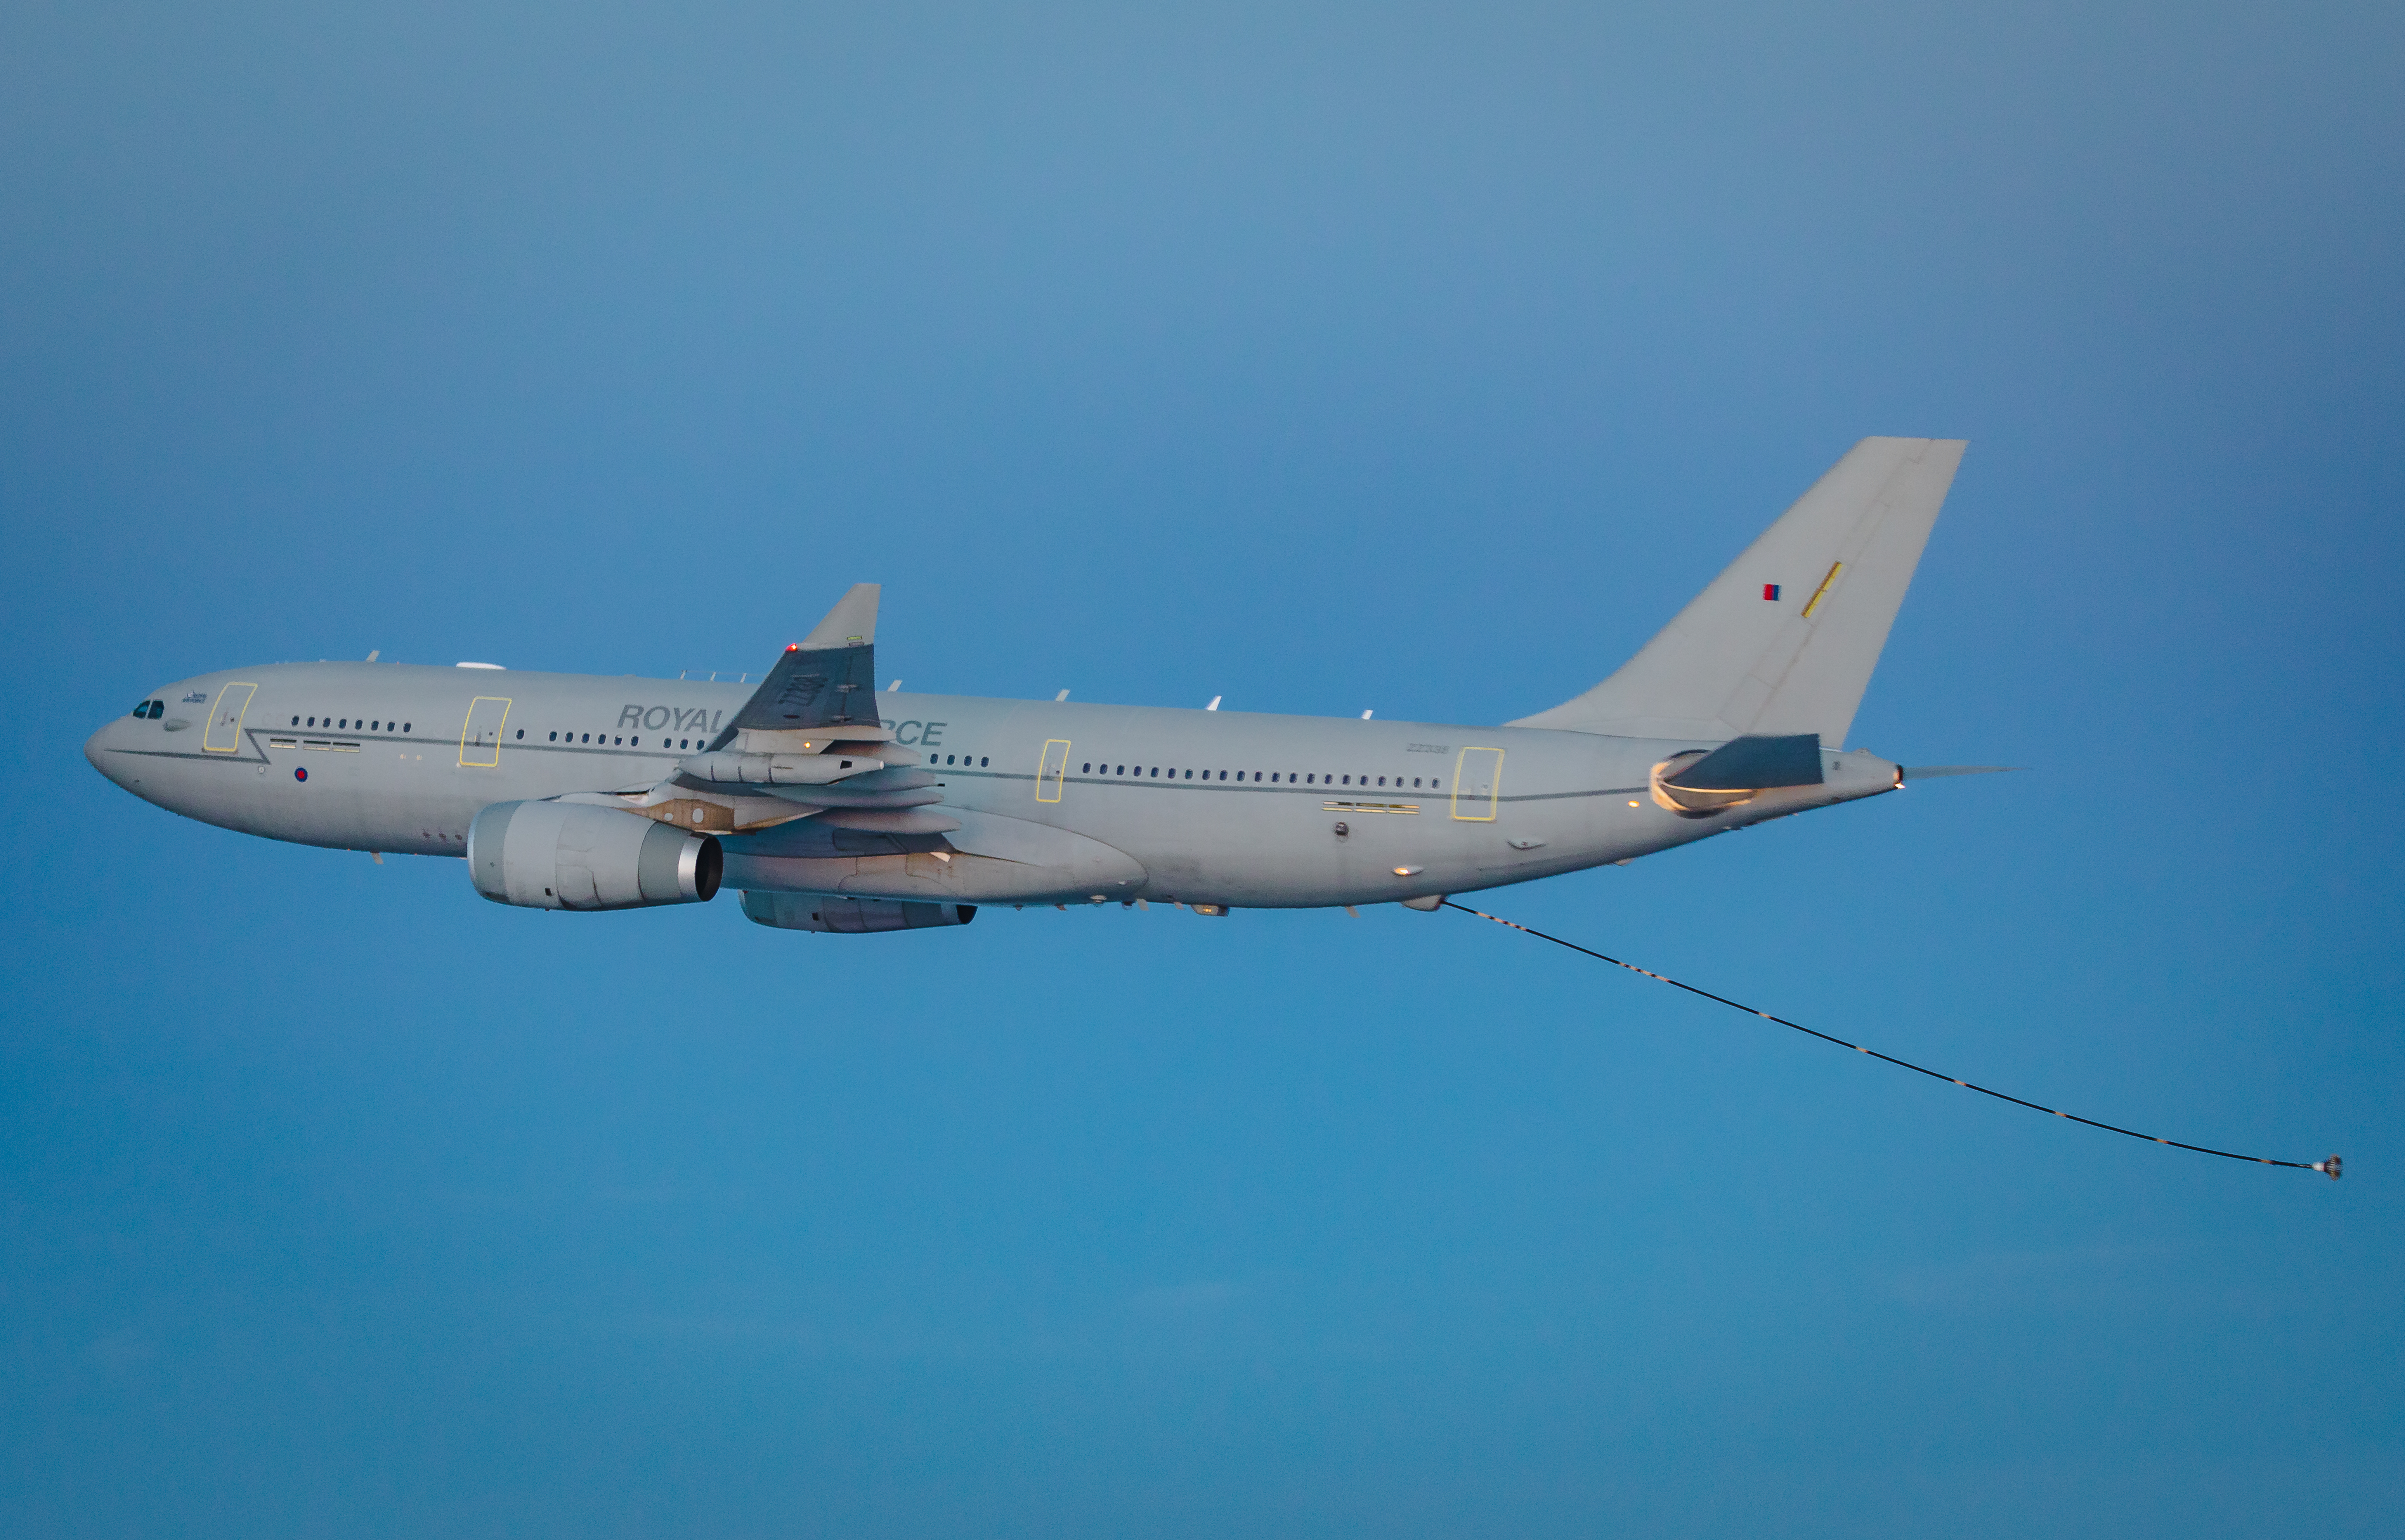 Image shows Voyager aircraft during air-to-air refuelling.